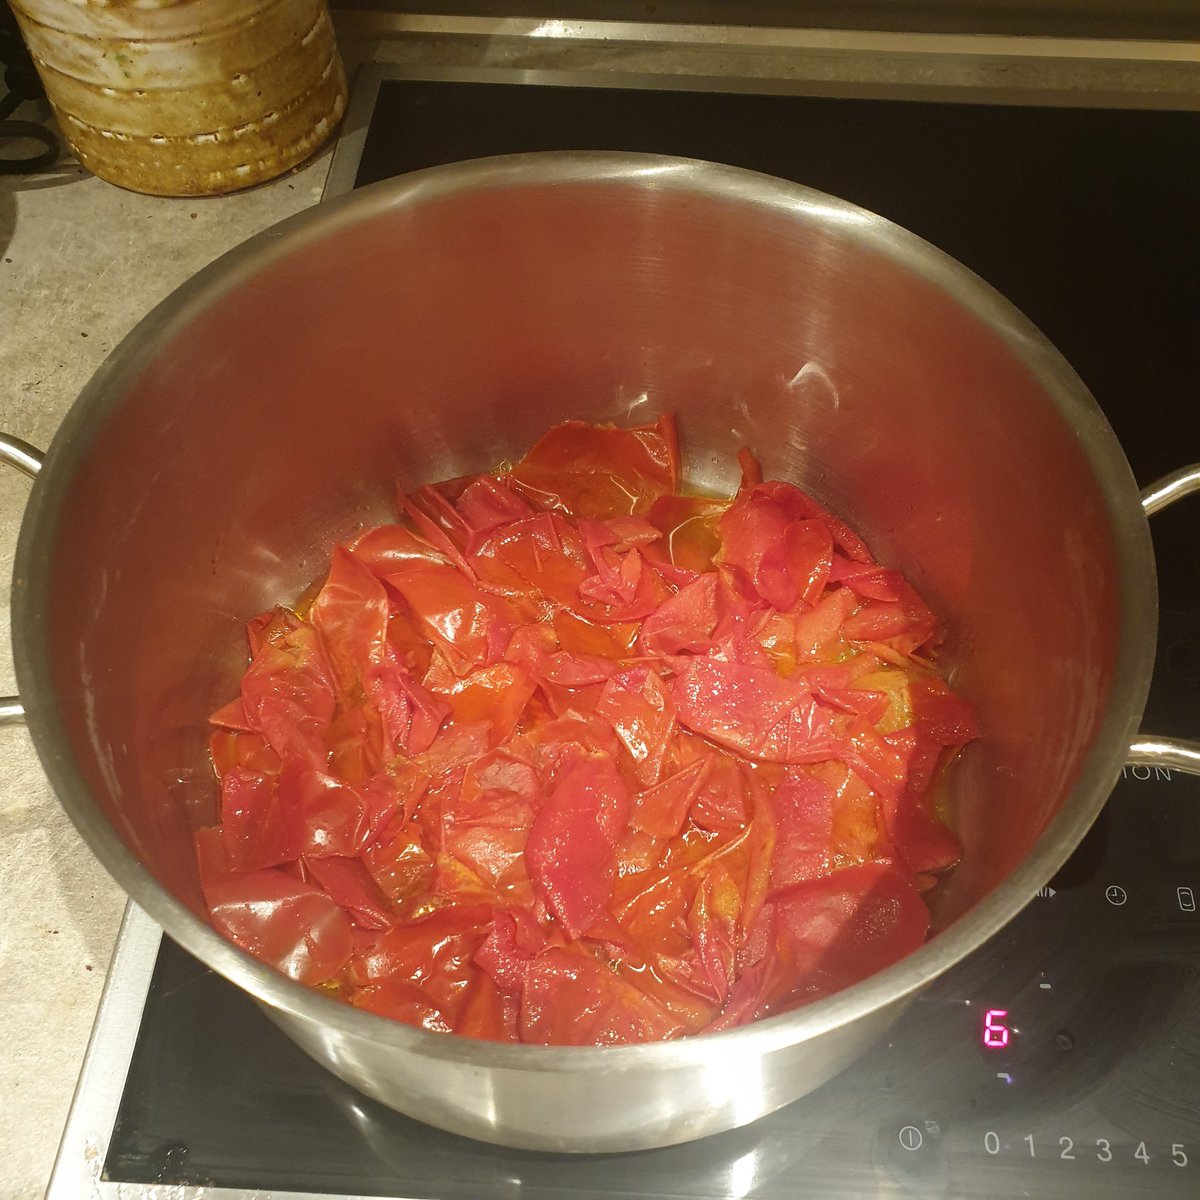 tomatoes blanched and peeled. save skinsroughly chop and liberally coat with salt. leave to sitpoach skins in olive oil on med low heat until oils have infused fully